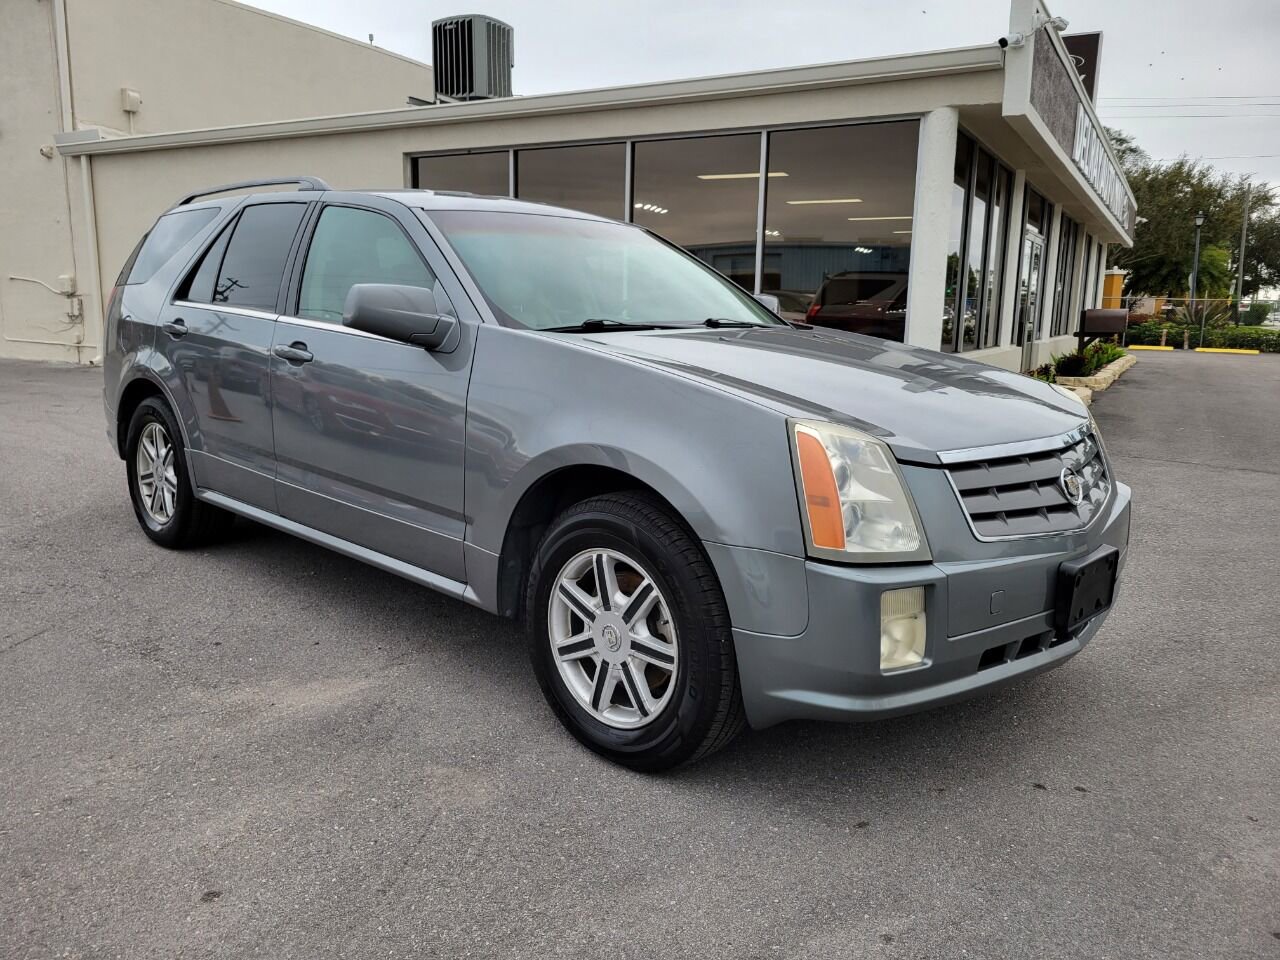 Used 2005 Cadillac SRX for Sale Right Now - Autotrader